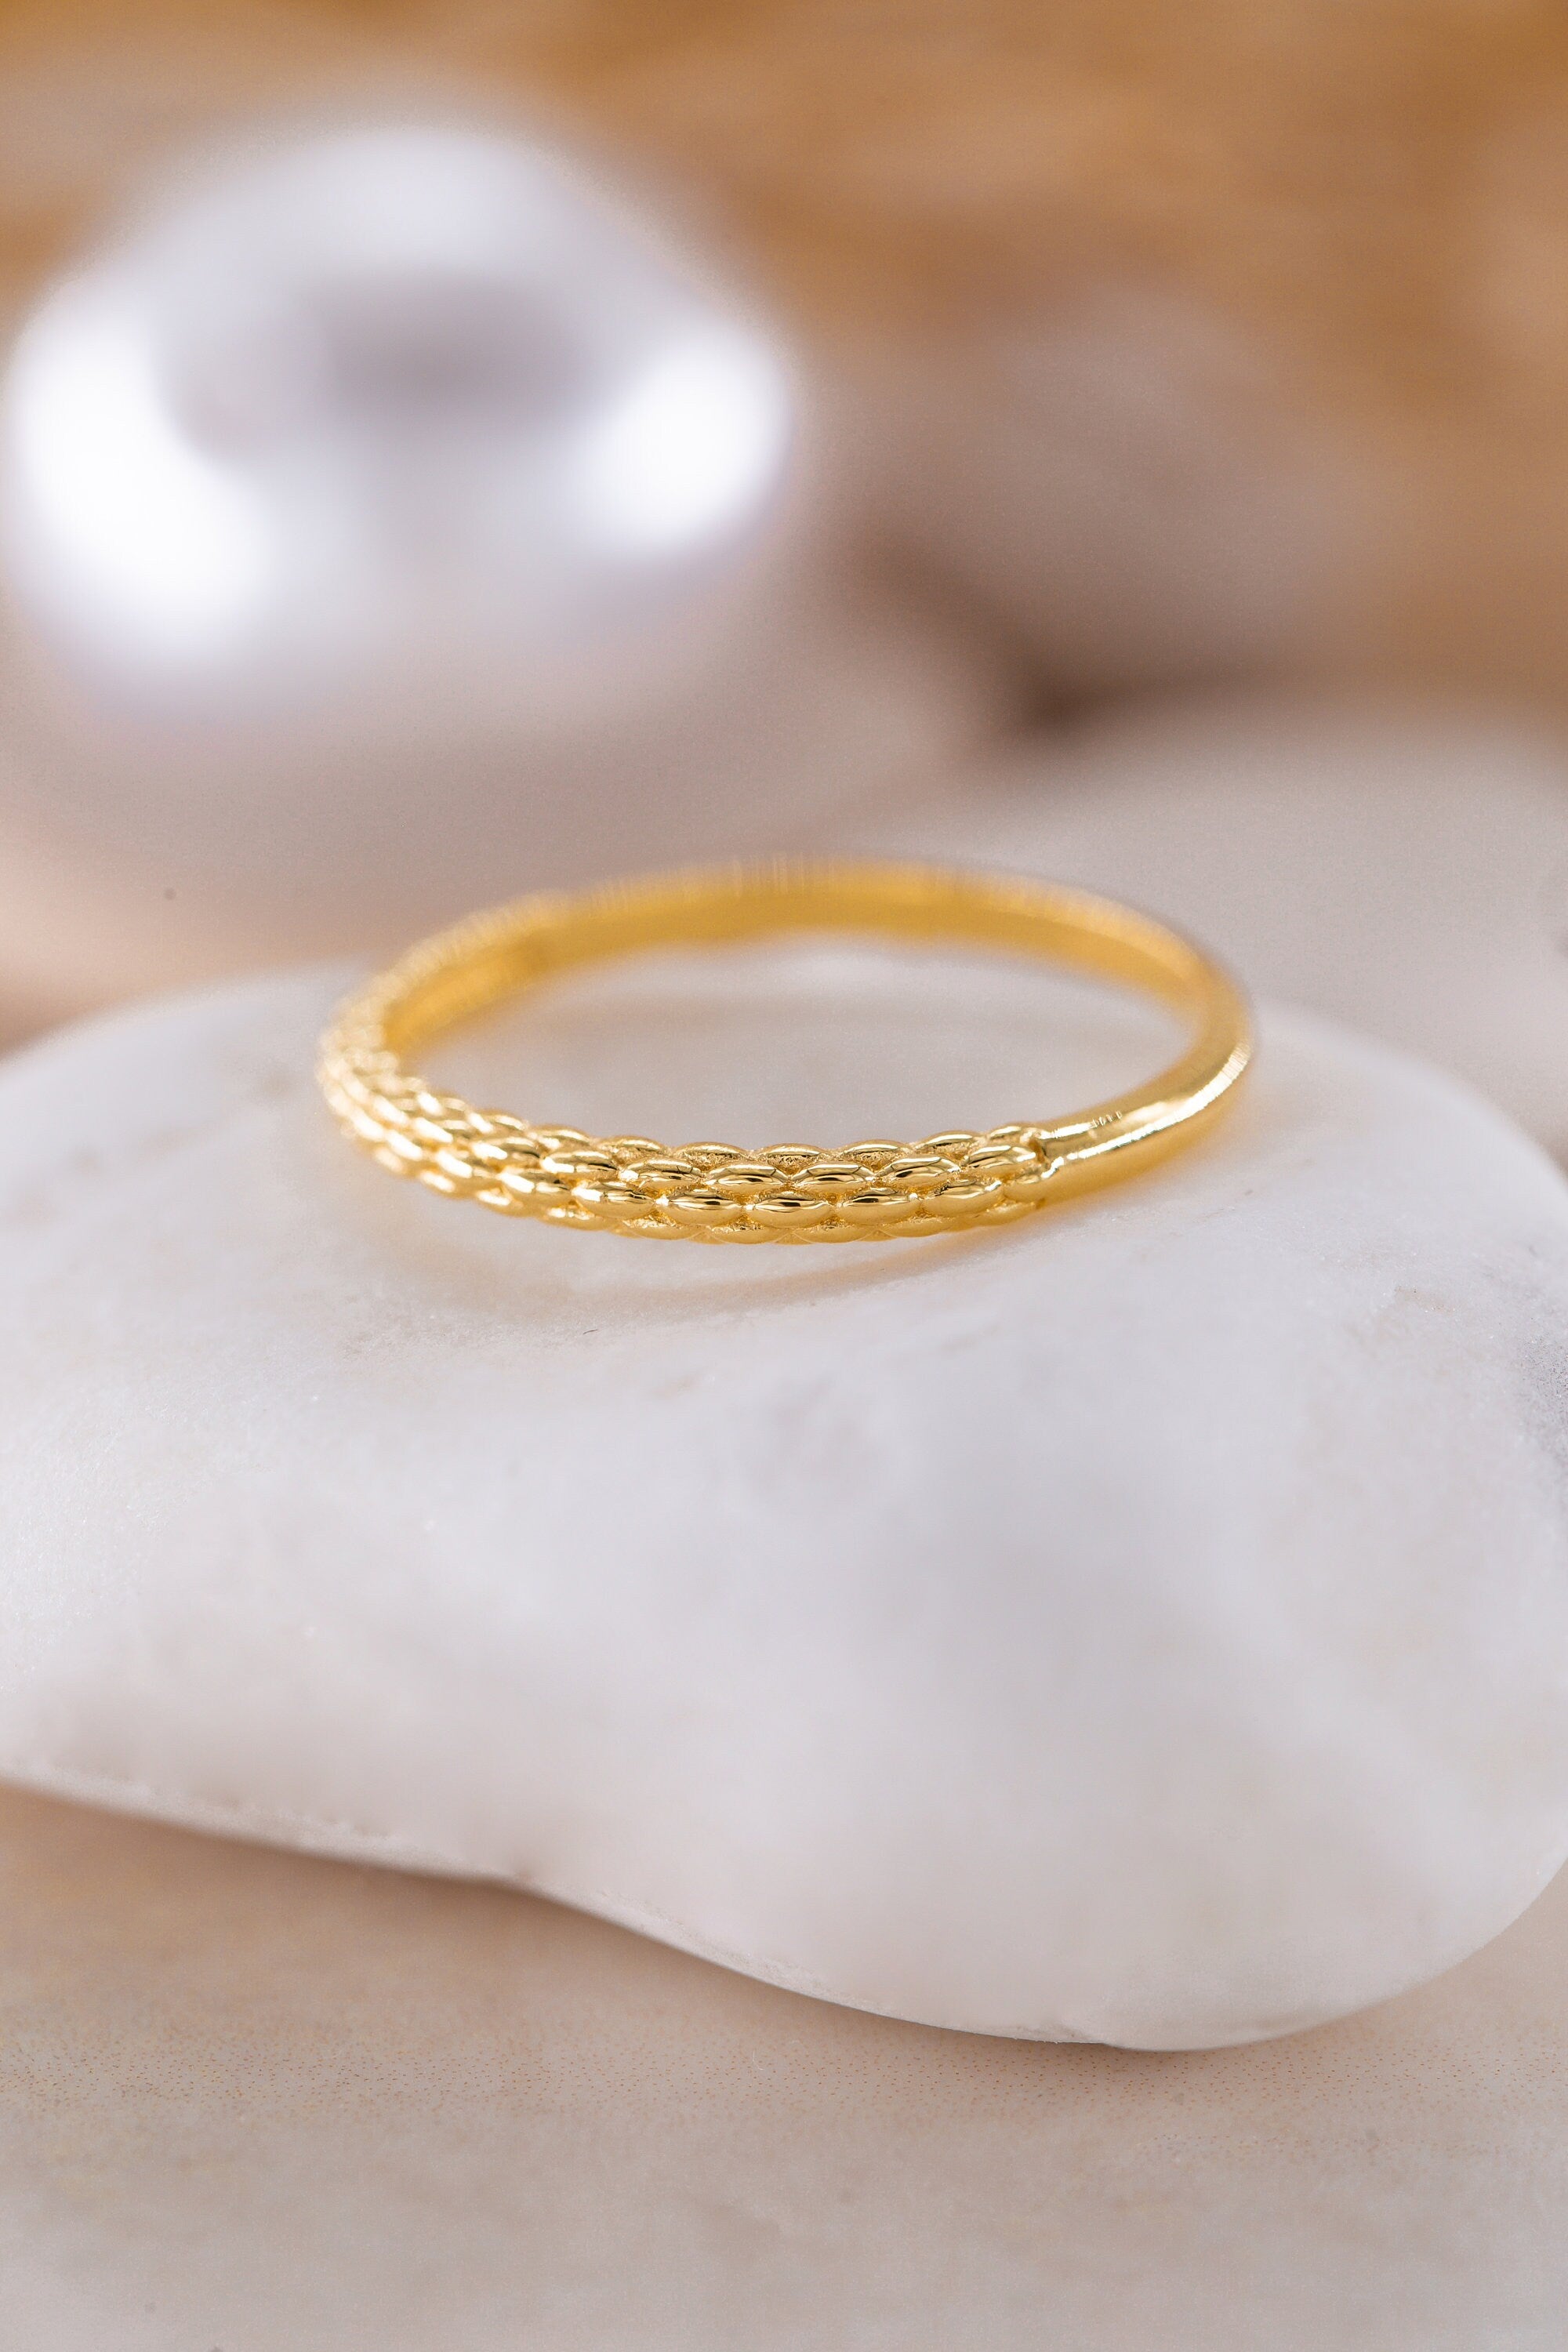 Handmade 18K Yellow Gold Circle Ring, White Gold Circle Design Ring, Engagement Ring, Gift For Mother Day, Mother Day Jewelry, Gift for Her